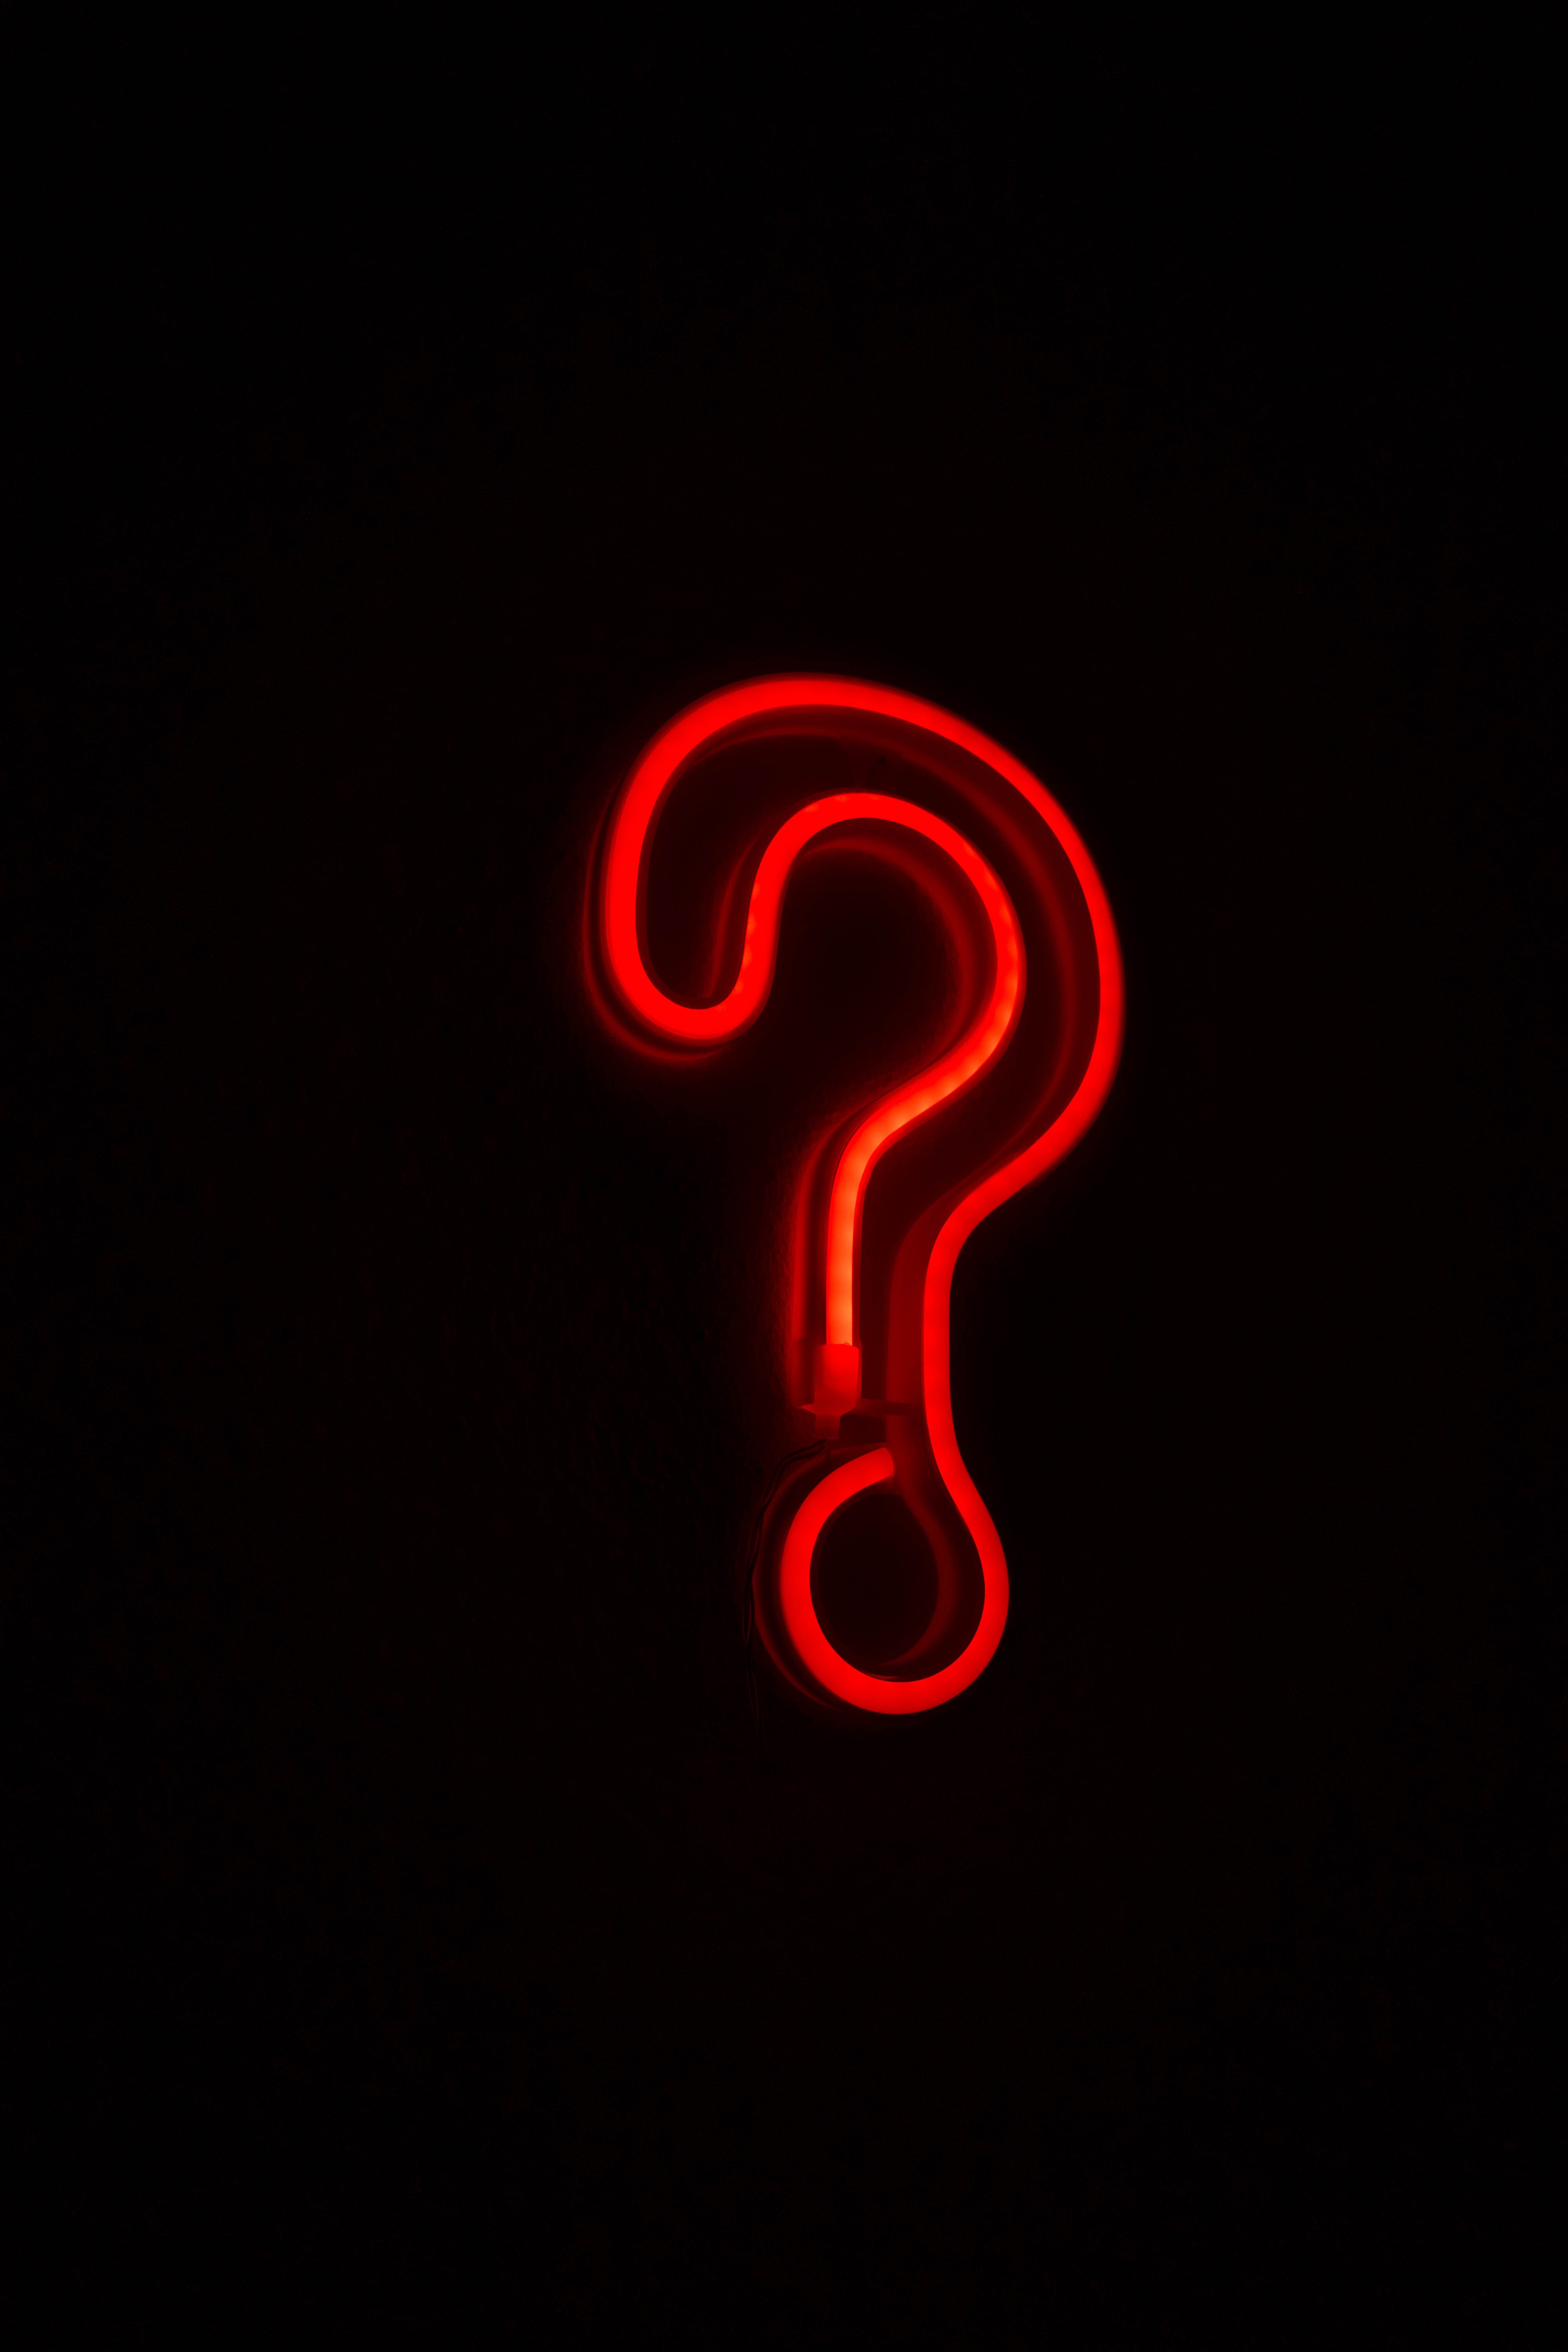 54412 download wallpaper dark, black, red, neon, symbol, question mark screensavers and pictures for free